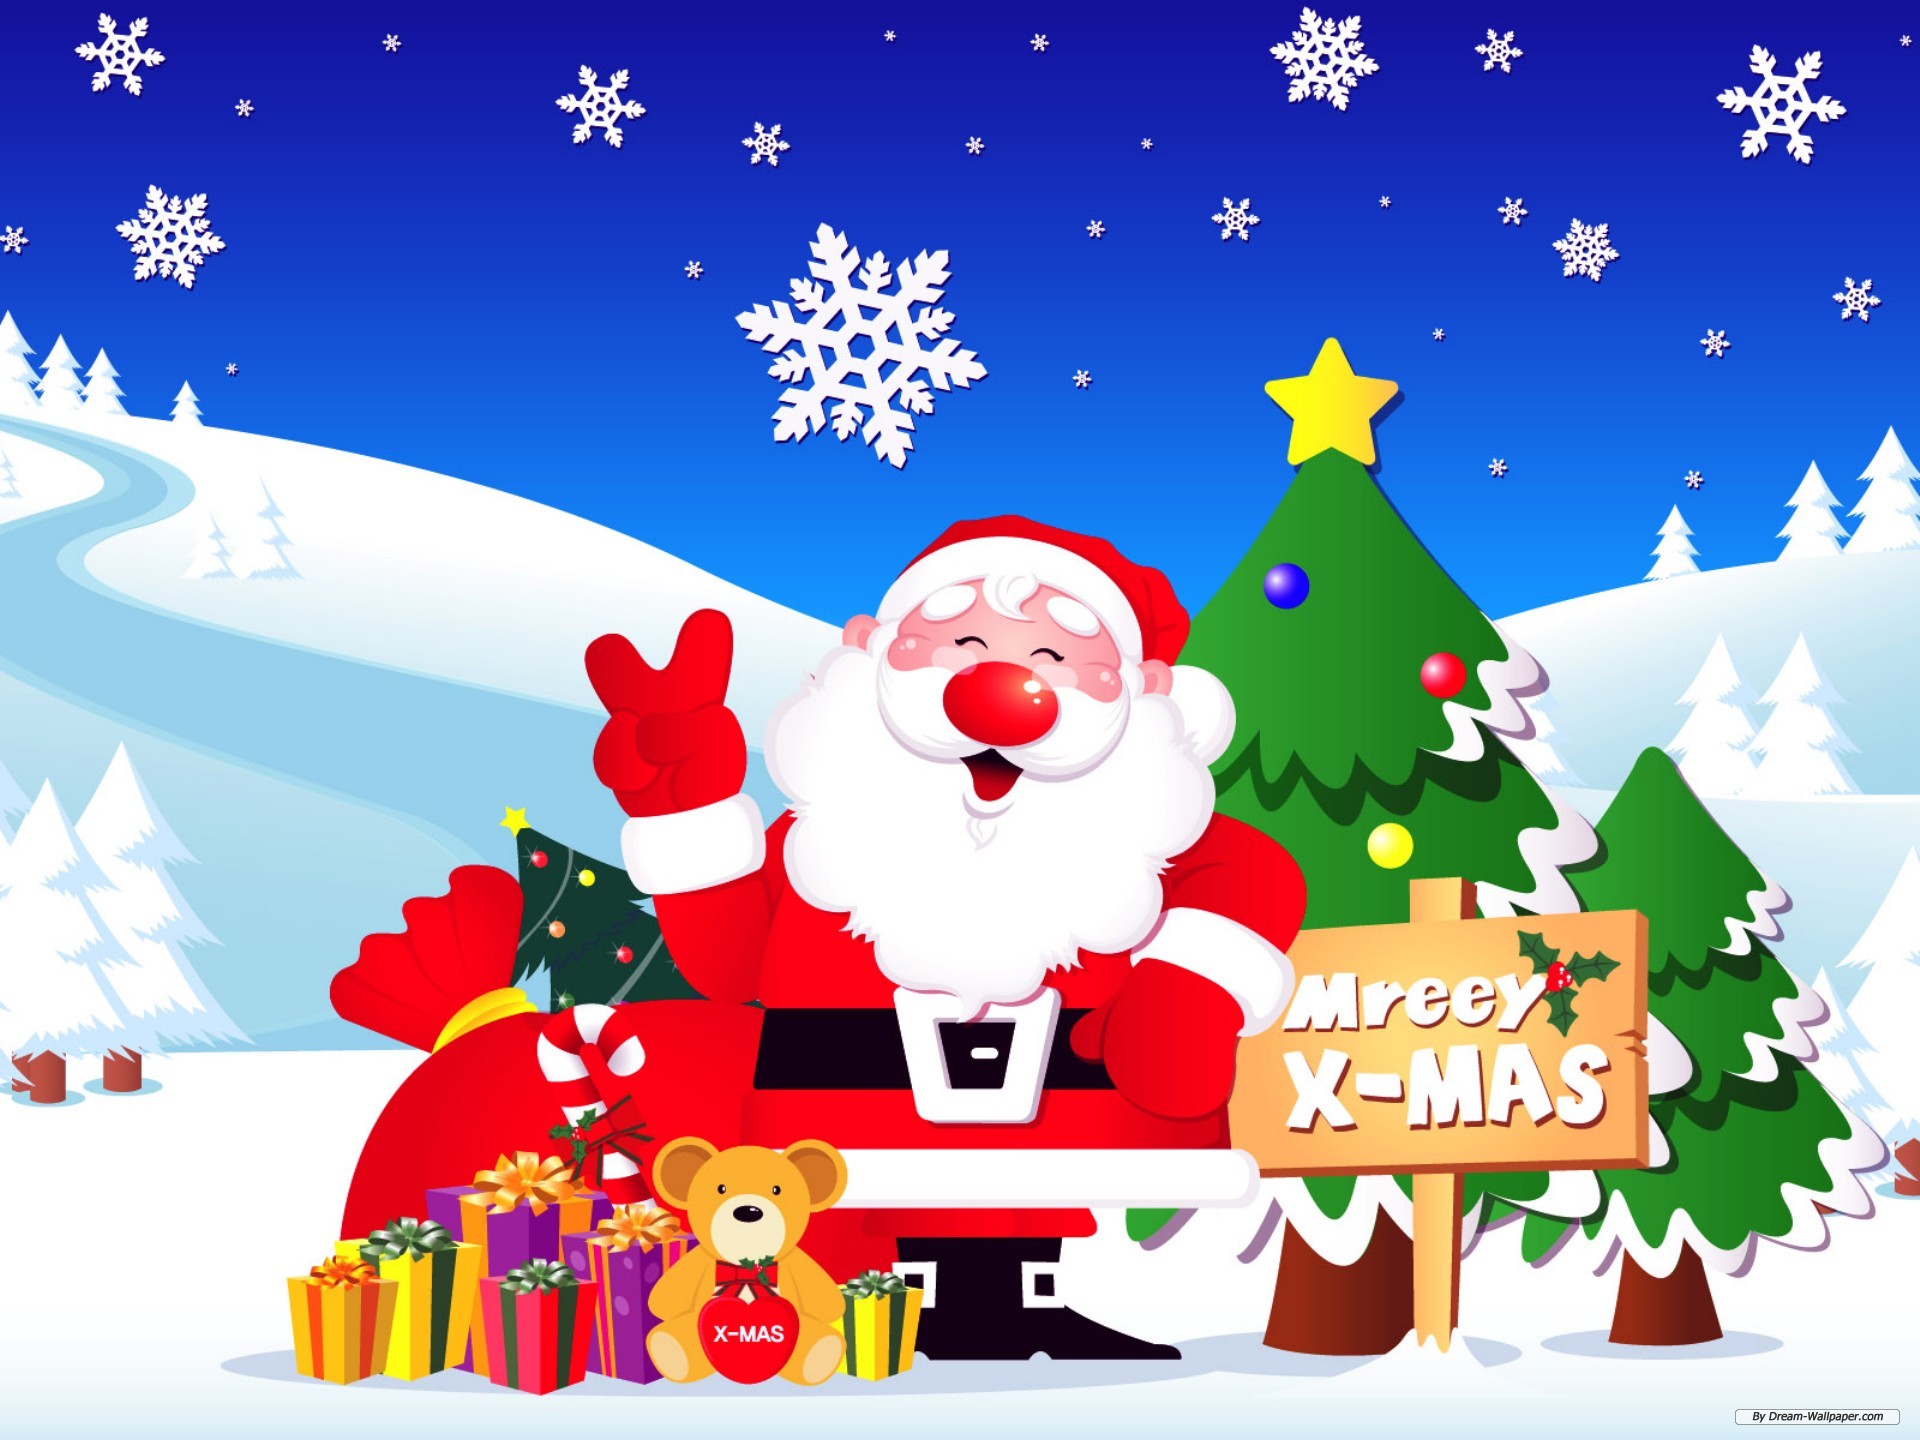 Free Holiday Wallpaper - Christmas Images In Cartoon - HD Wallpaper 